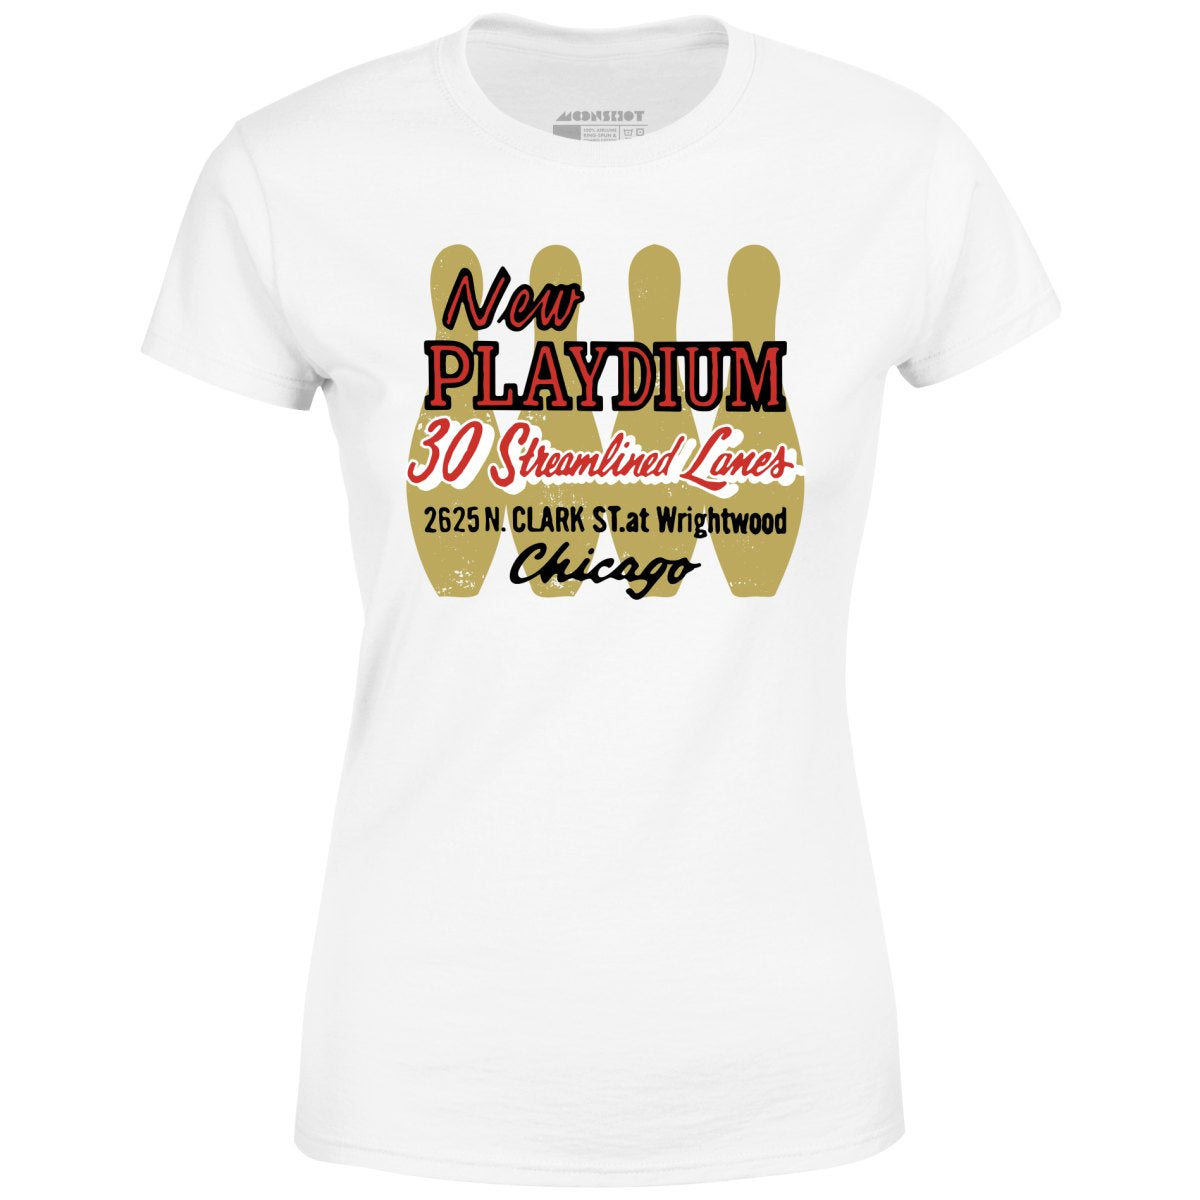 New Playdium - Chicago, IL - Vintage Bowling Alley - Women's T-Shirt